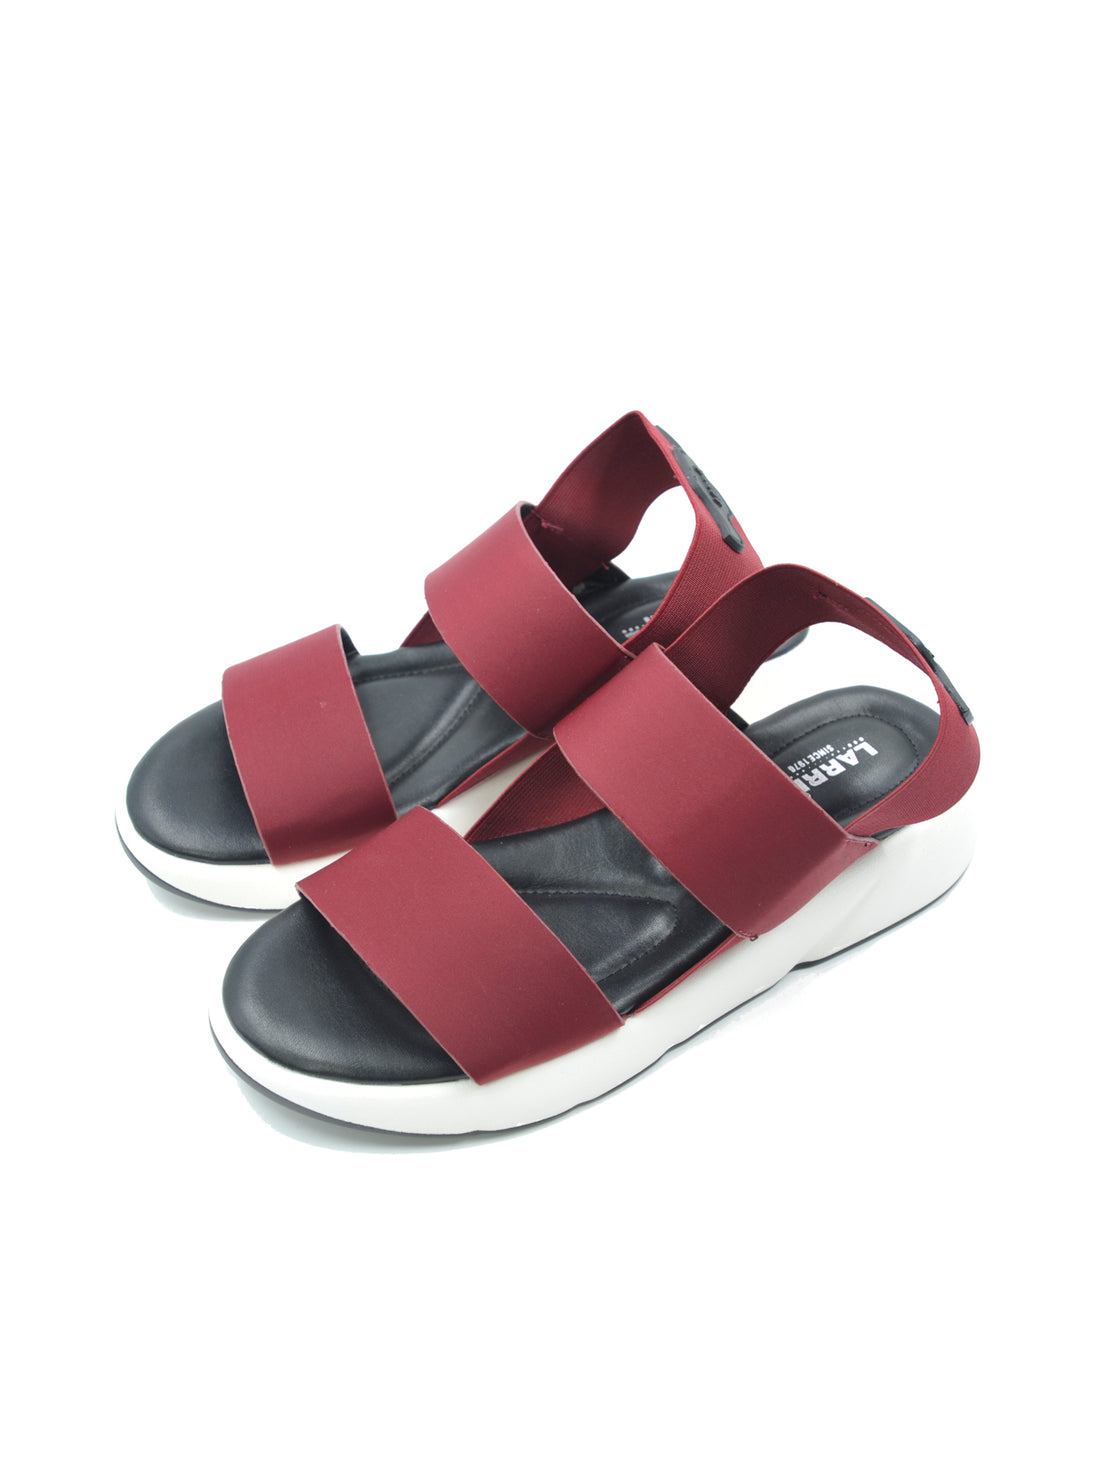 Larrie Red Stylist Elastically Strap Comfortable Sandals